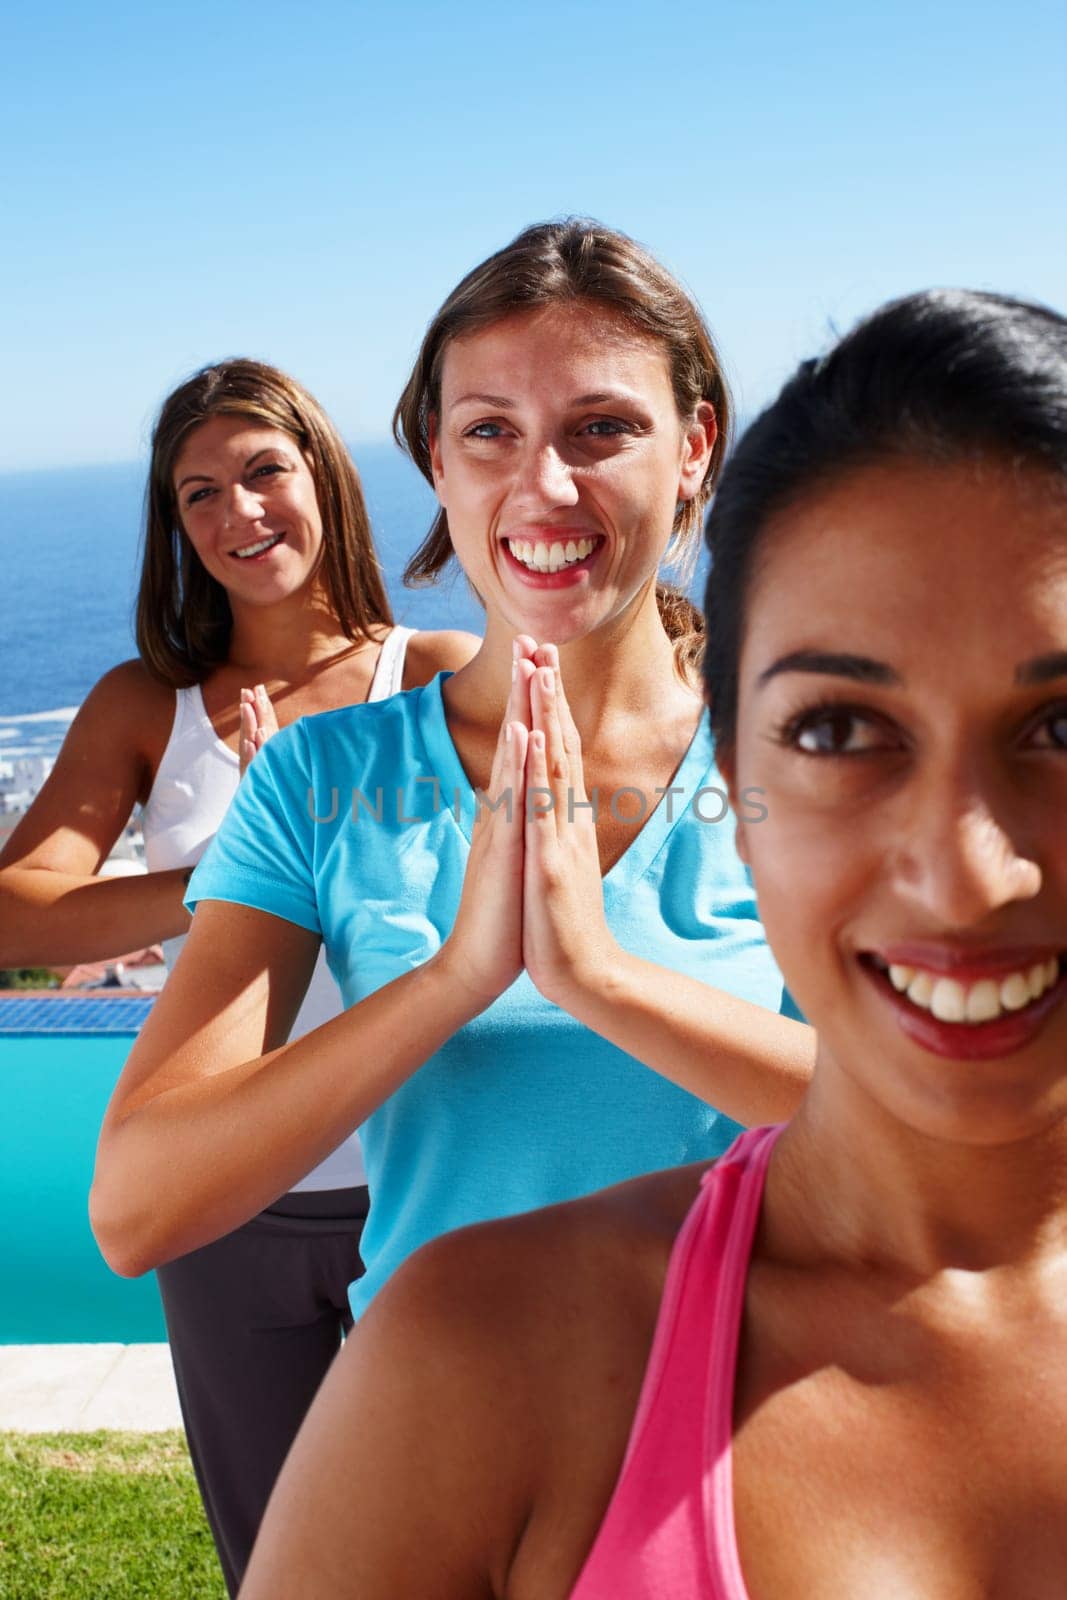 Ocean, yoga and namaste with group of women on grass together for fitness, exercise or mindfulness resort. Nature, relax and happy friends at outdoor holistic retreat for wellness, zen and sunshine.